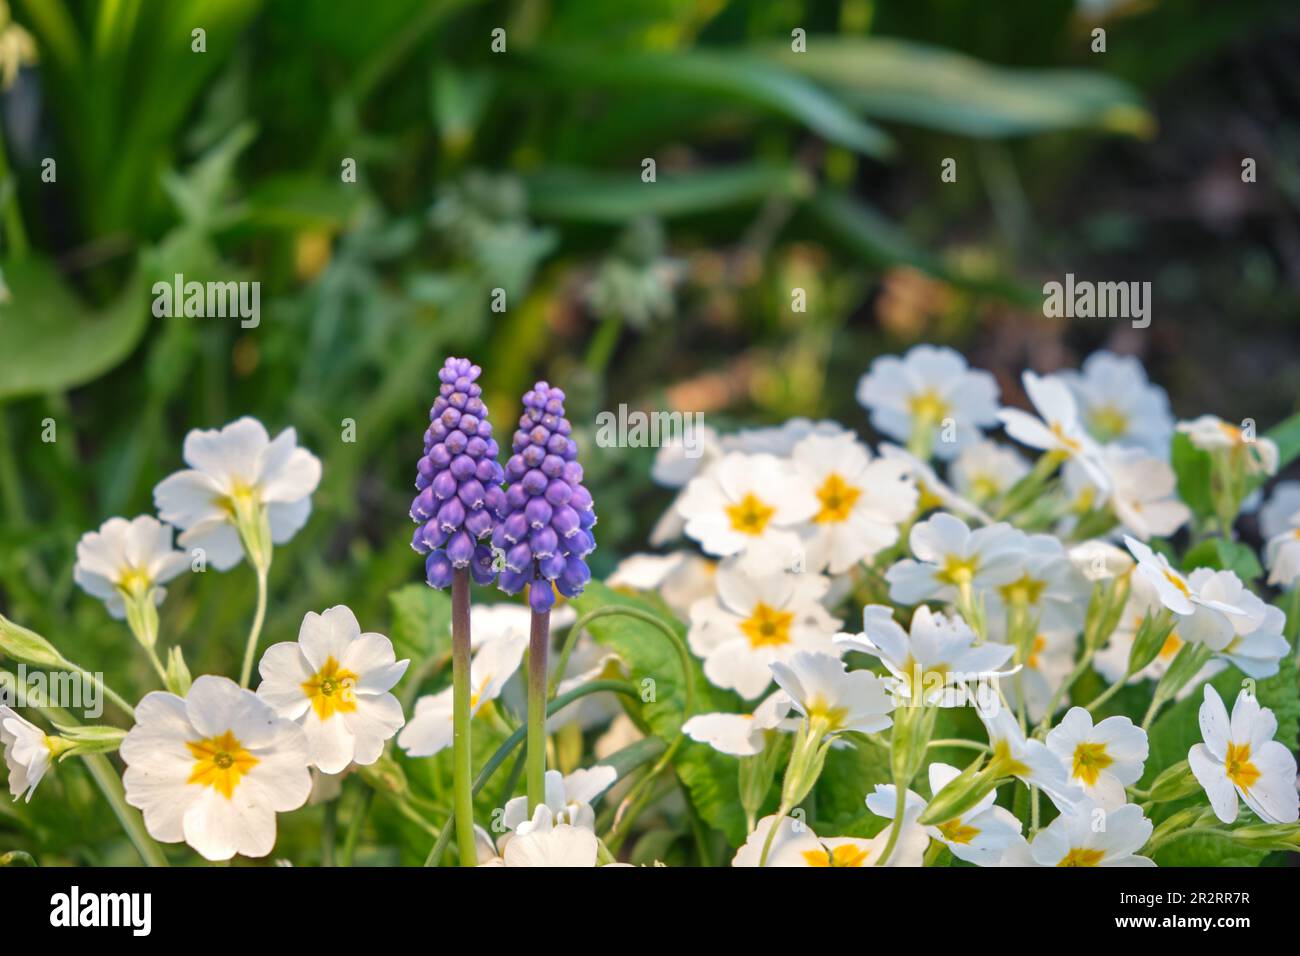 White primrose and grape hyacinth close-up. Many flowers. Grows in a natural environment in the garden Stock Photo